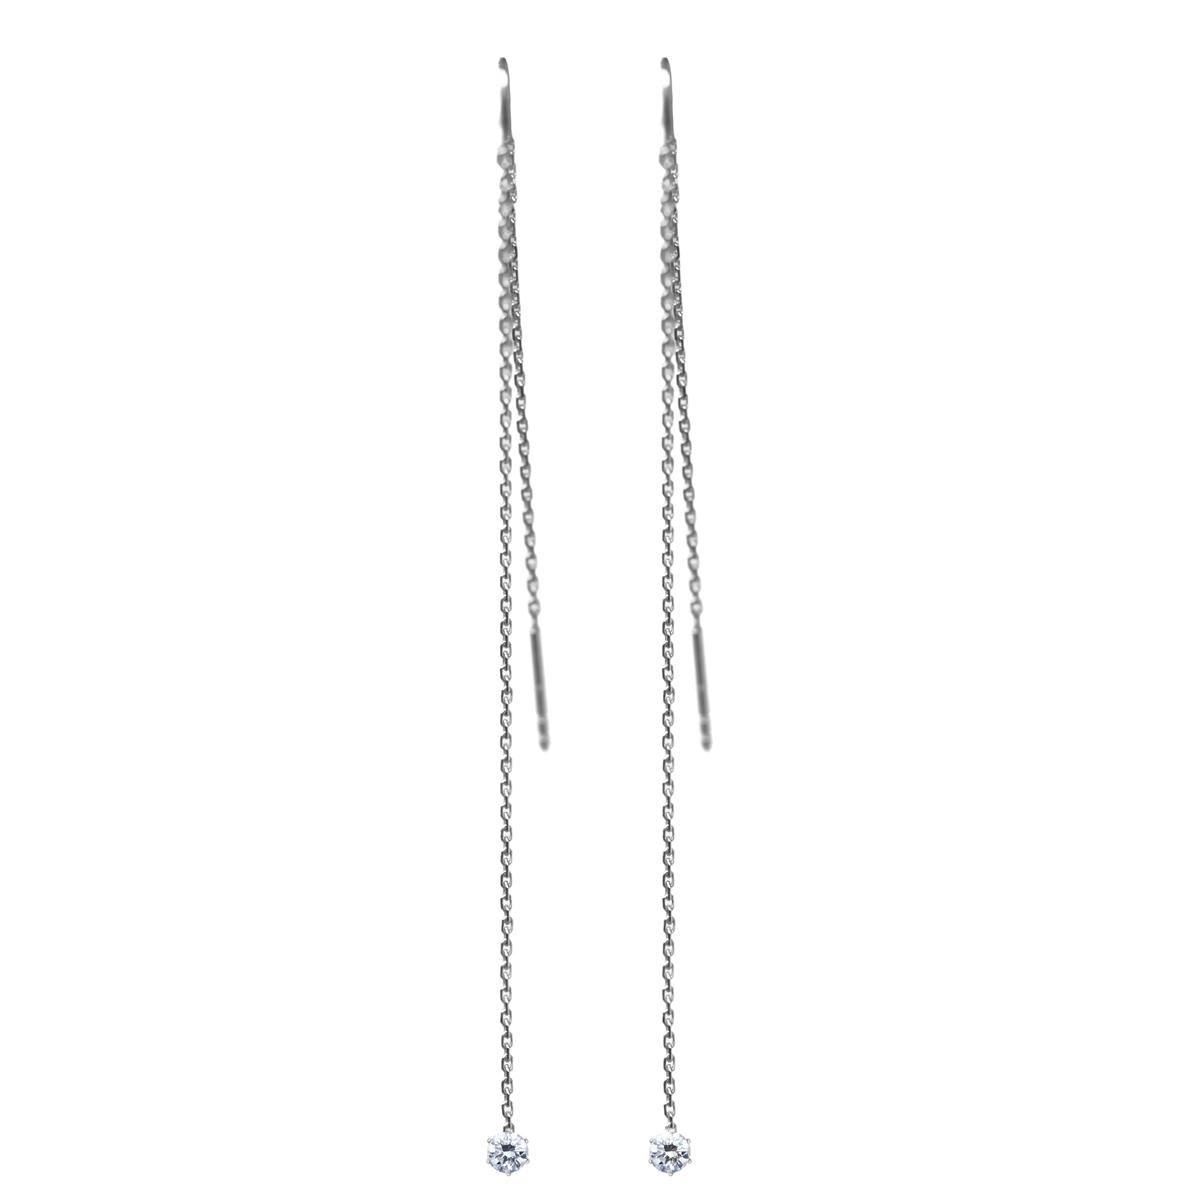 Redline Jewerly - Absolu - Earrings with 0.20ct Diamond in White